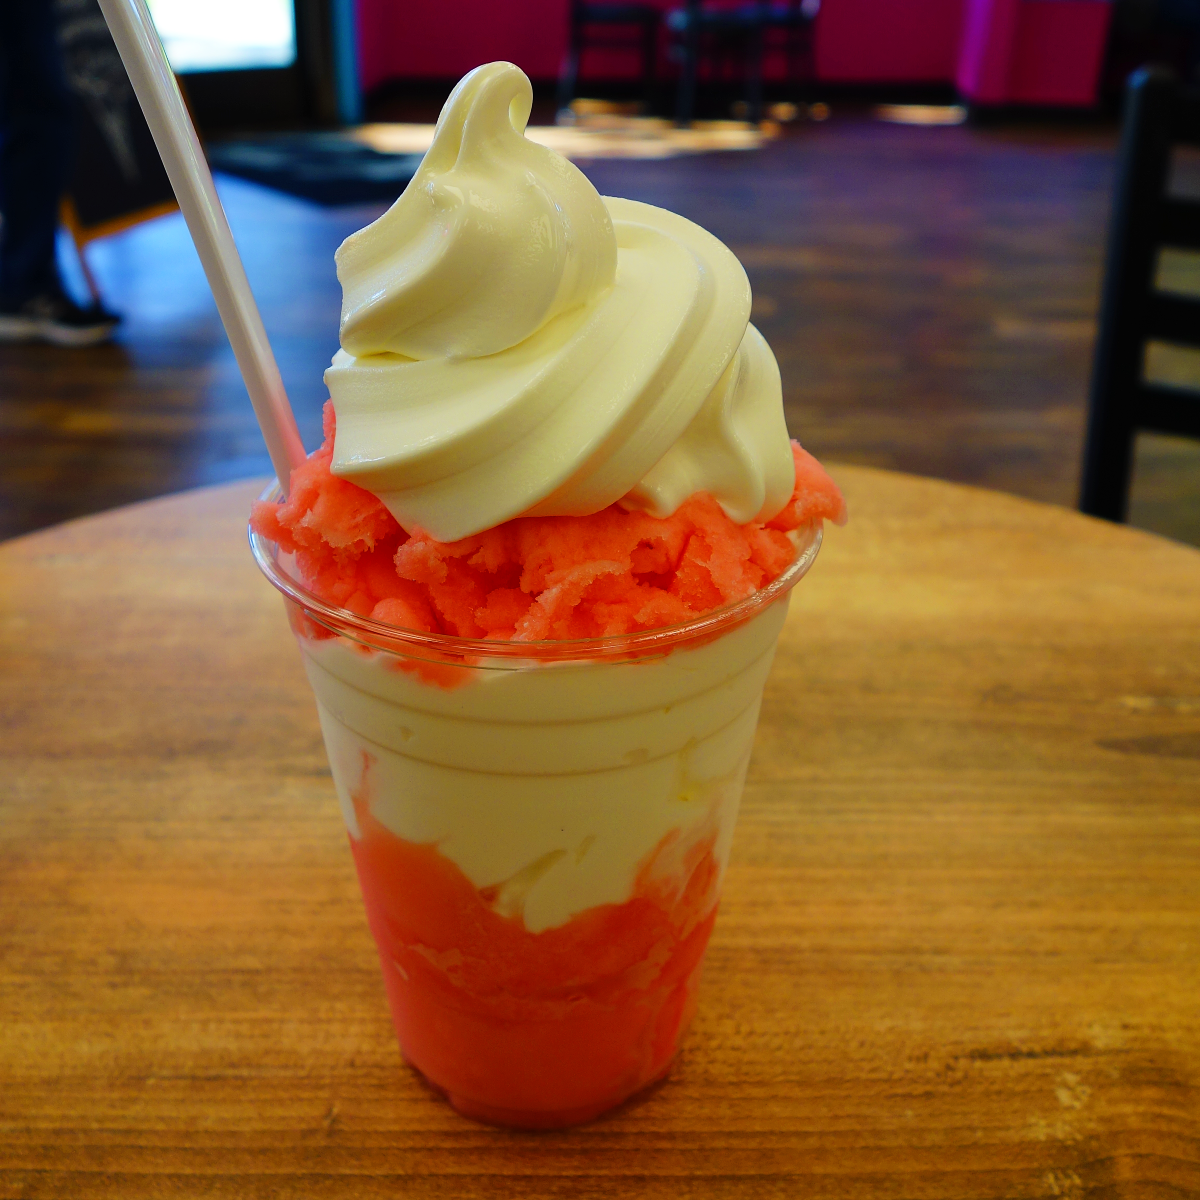 Strawberry lemonade Italian Ice with soft serve vanilla ice cream and whipped cream from Daddy's Dairy in Norwood, Mass.